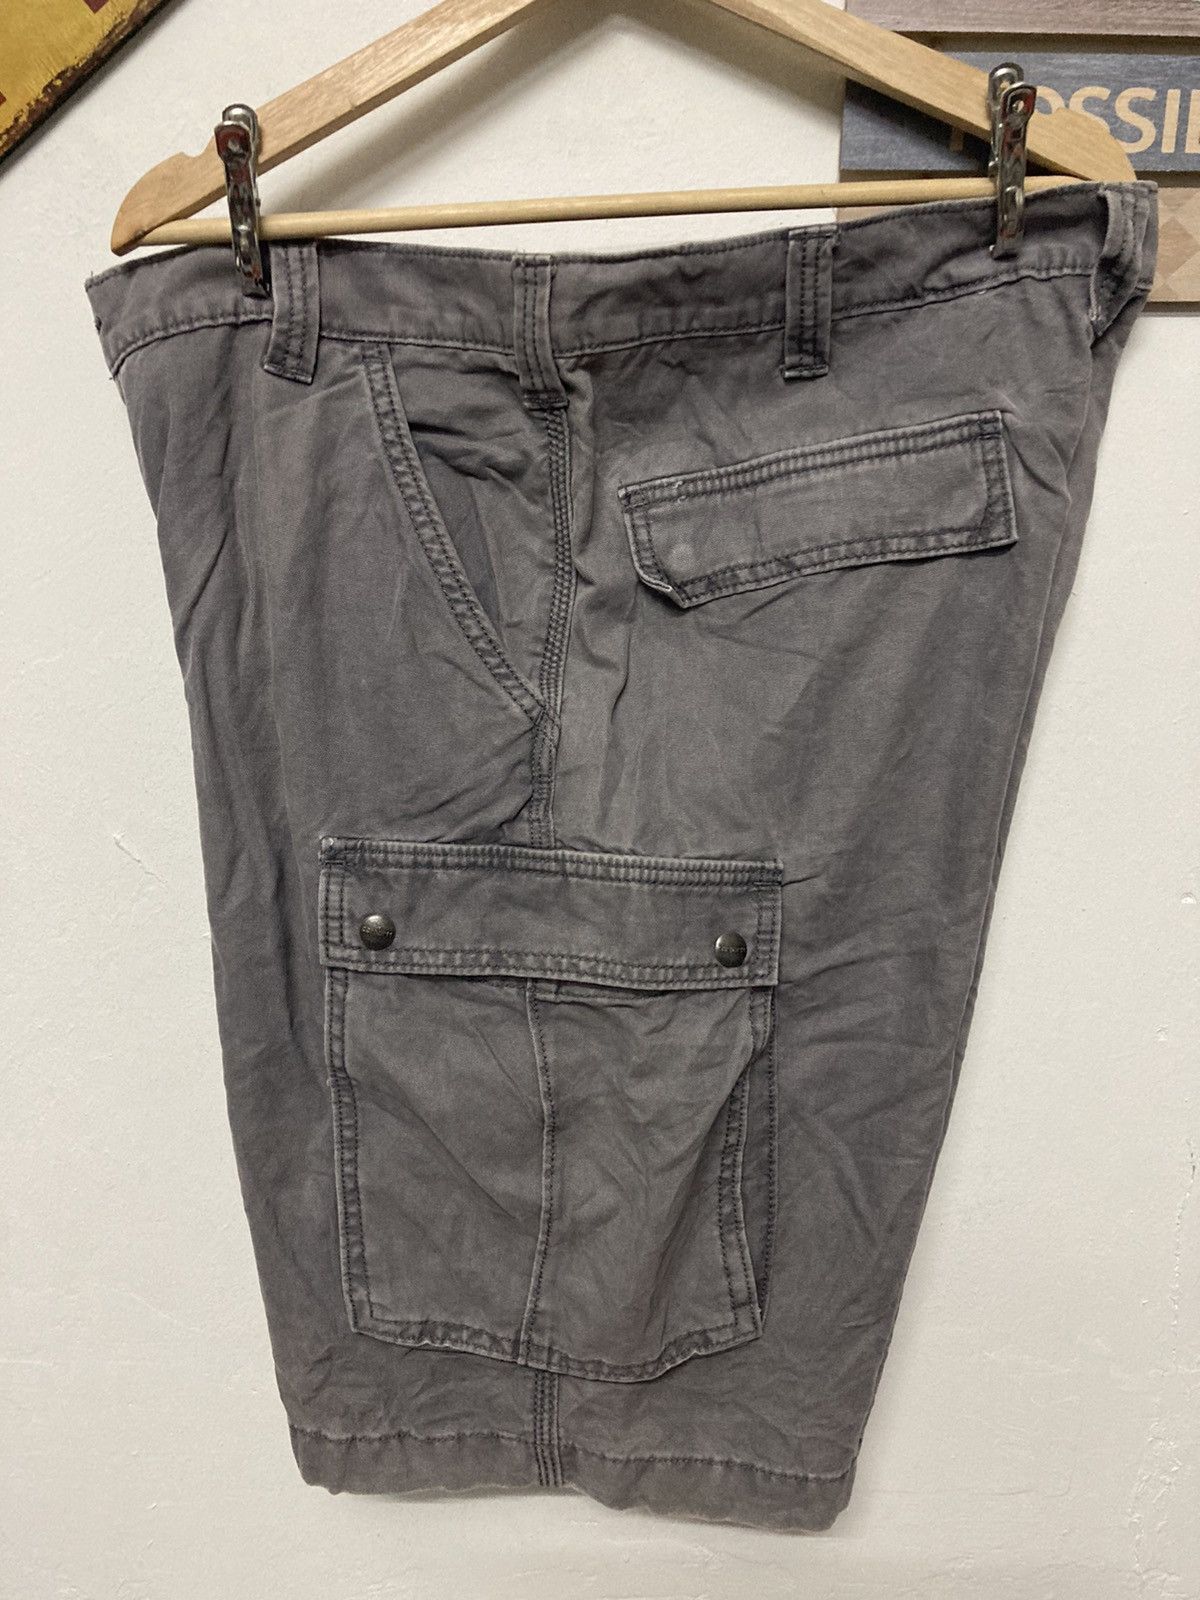 Vintage - Carhatt Relaxed Fit Cargo Short Pant Size 38 - 8